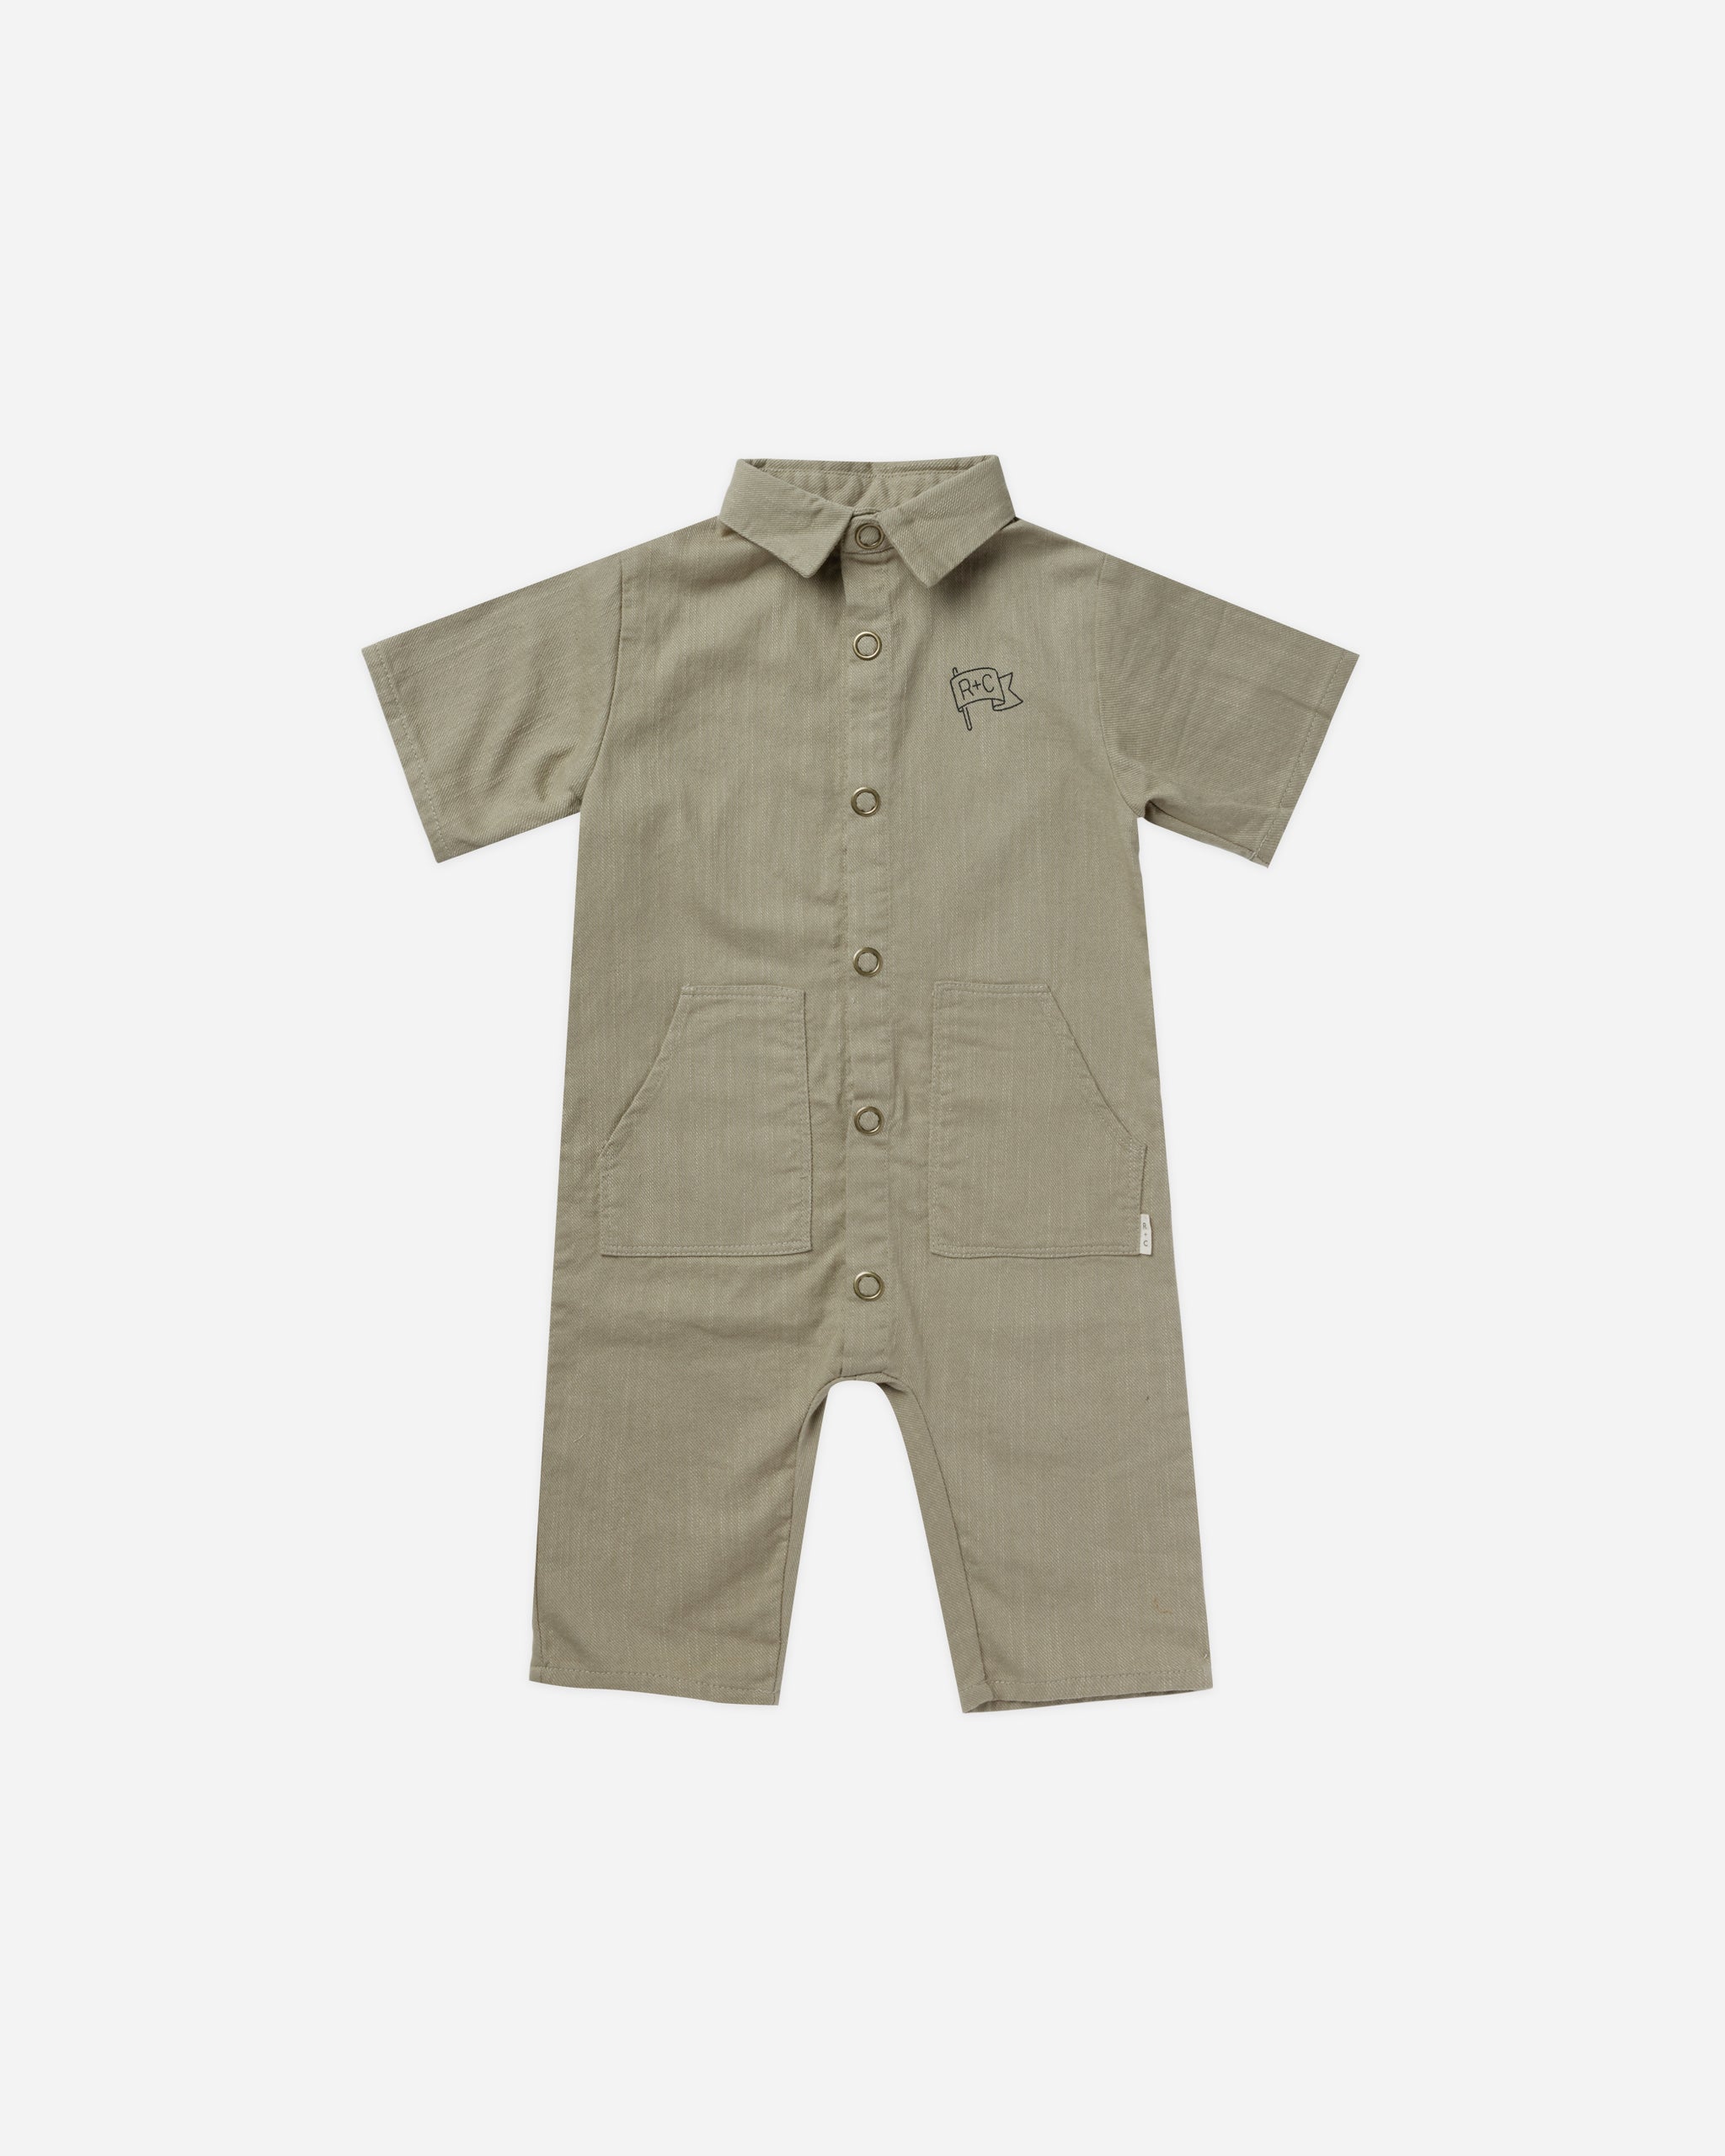 Rhett Jumpsuit || Fern - Rylee + Cru | Kids Clothes | Trendy Baby Clothes | Modern Infant Outfits |